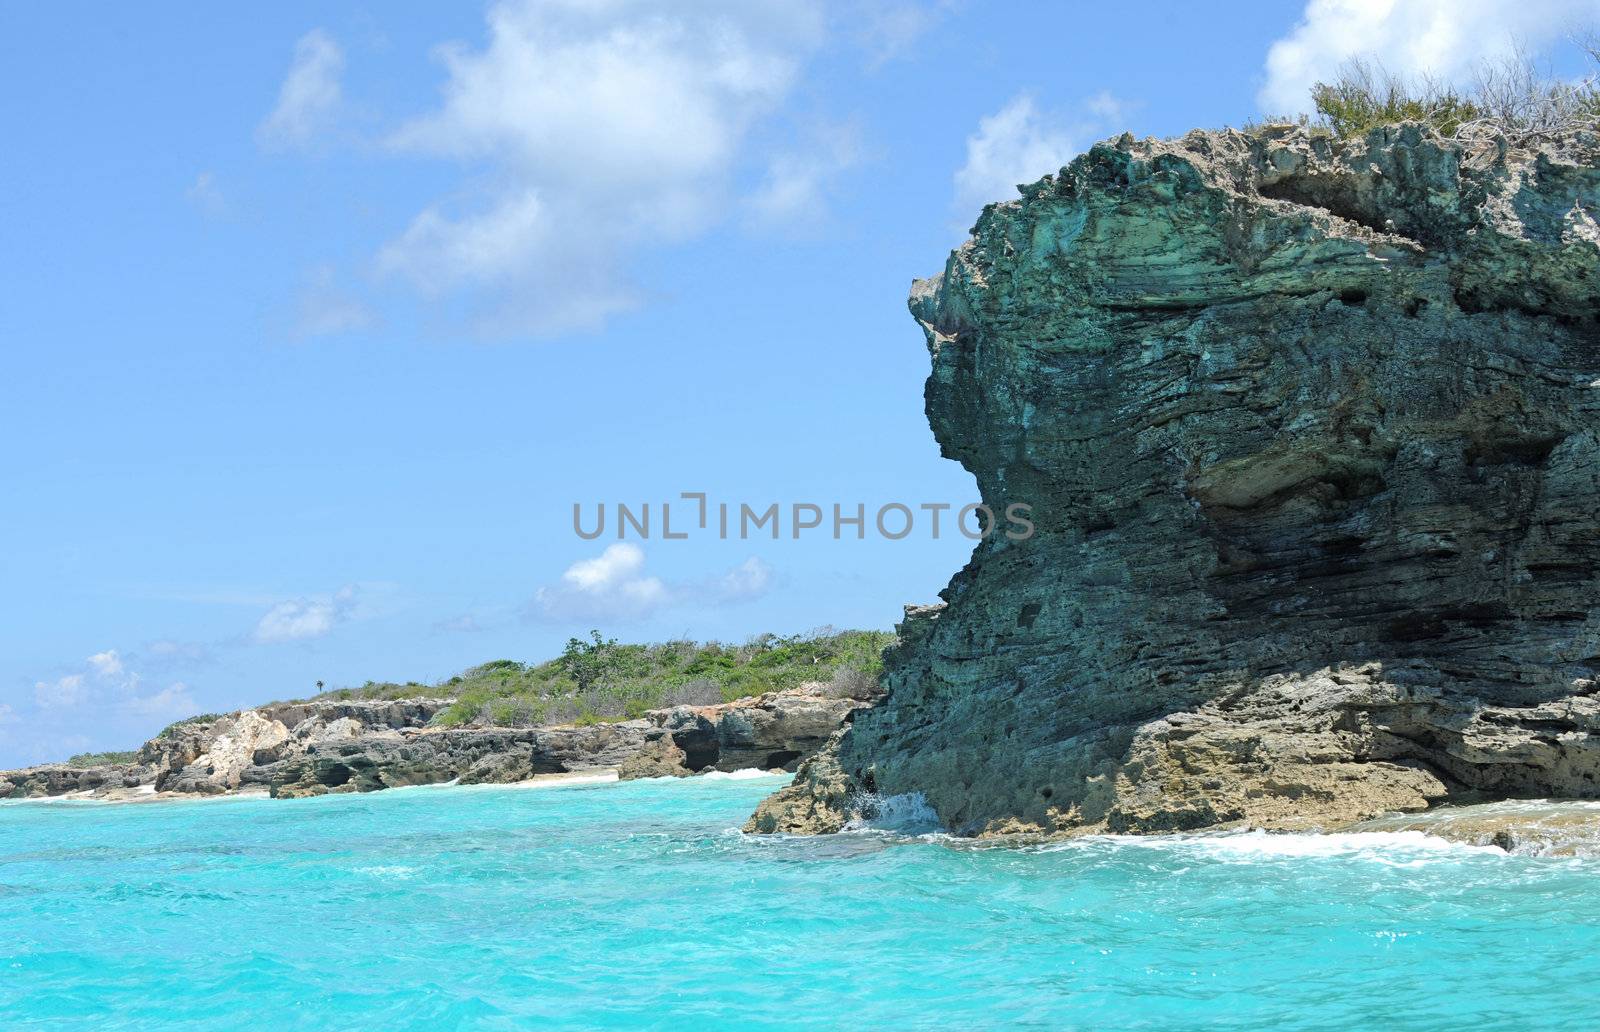 Rocky beach in scenic tropical setting by ftlaudgirl